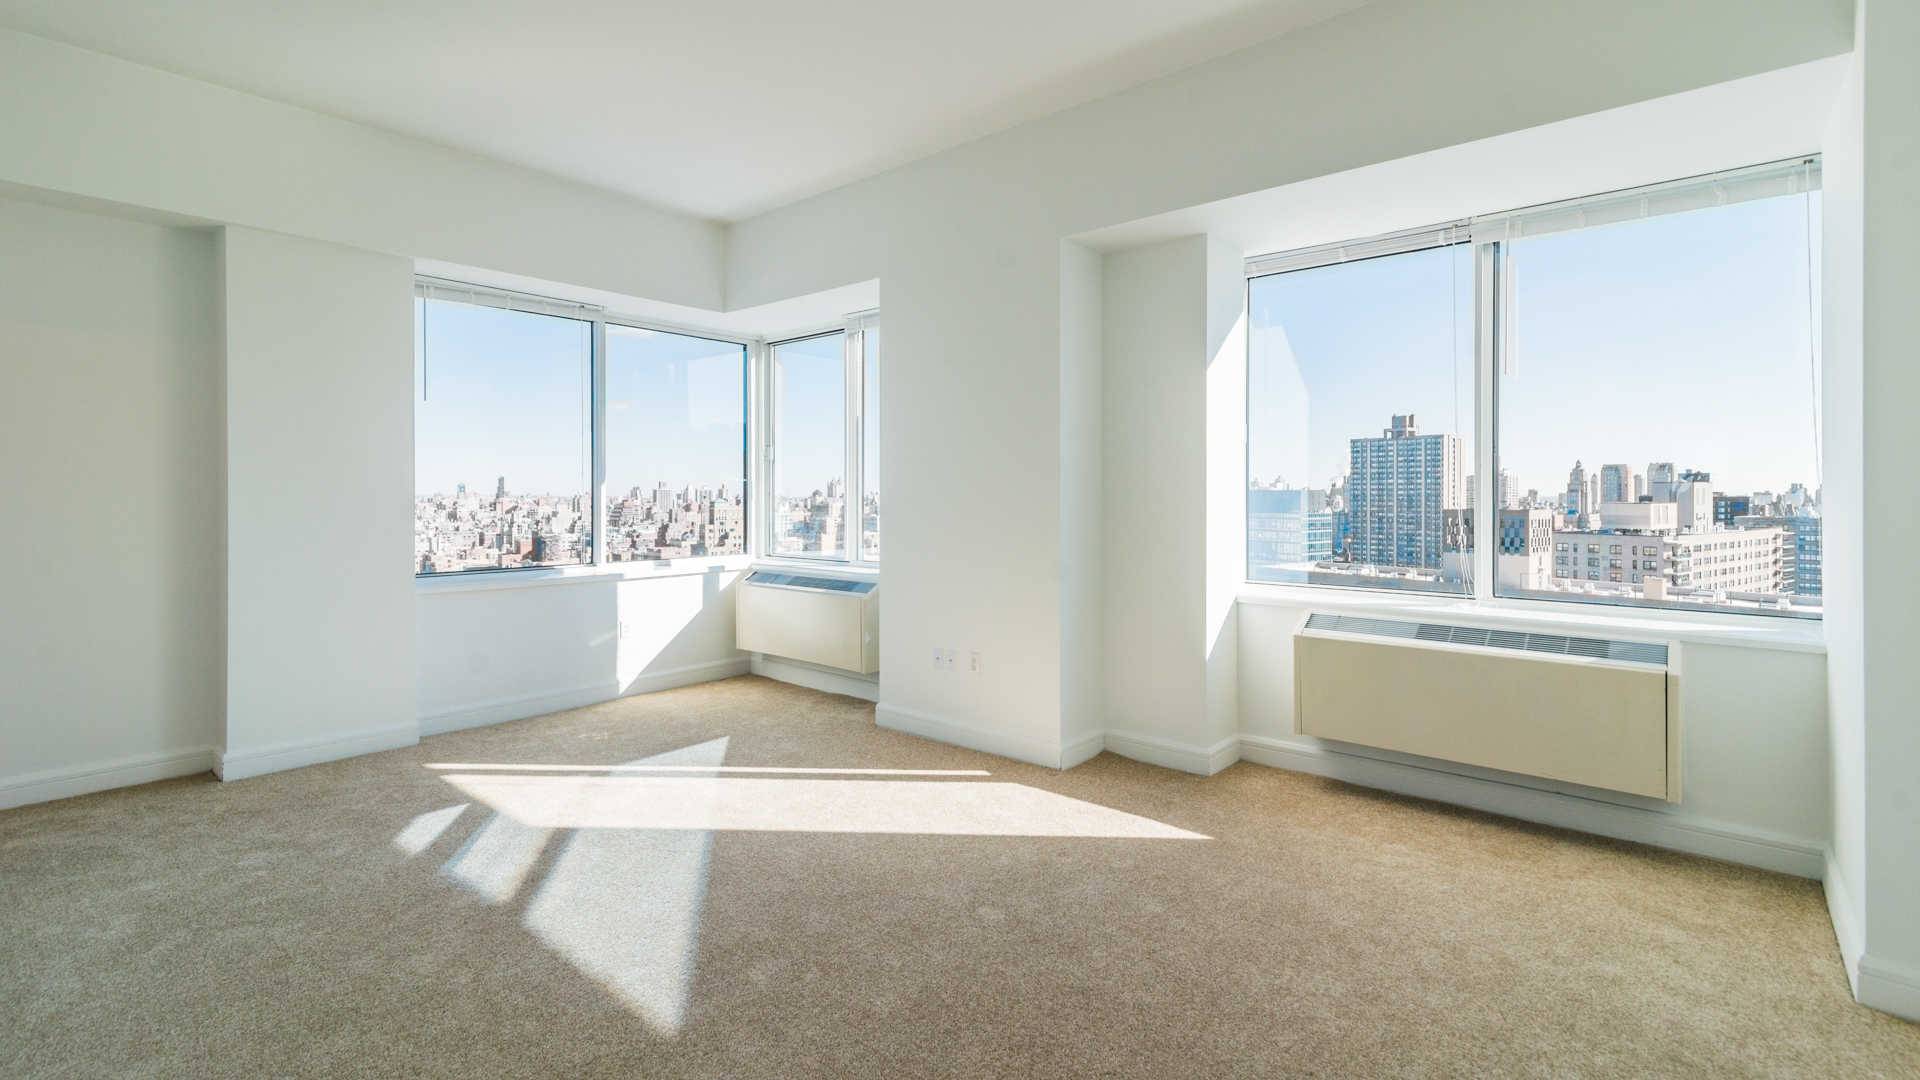 Fabulous 1 bedroom 1 bathroom  on the high-rise floor with fantastic river  view.